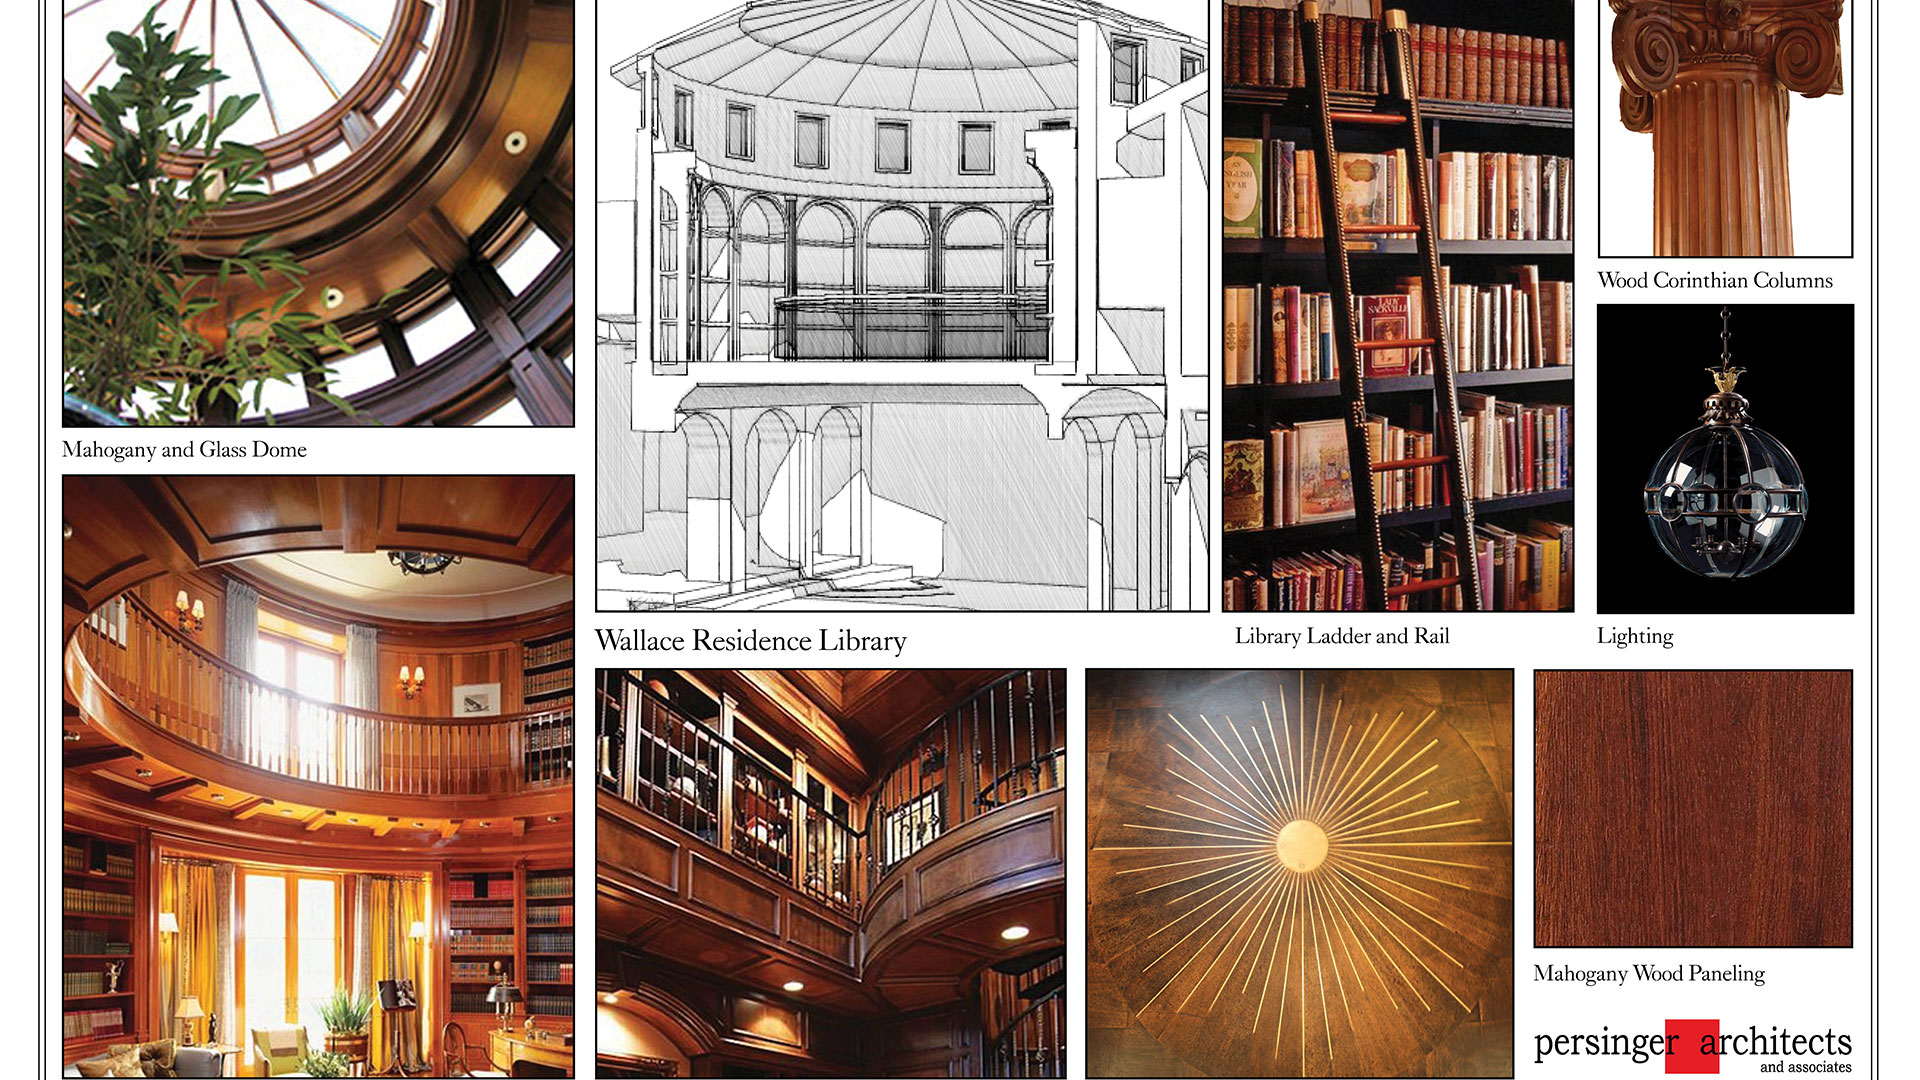 Compilation of images and ideas highlighting bookshelves and exposed wood